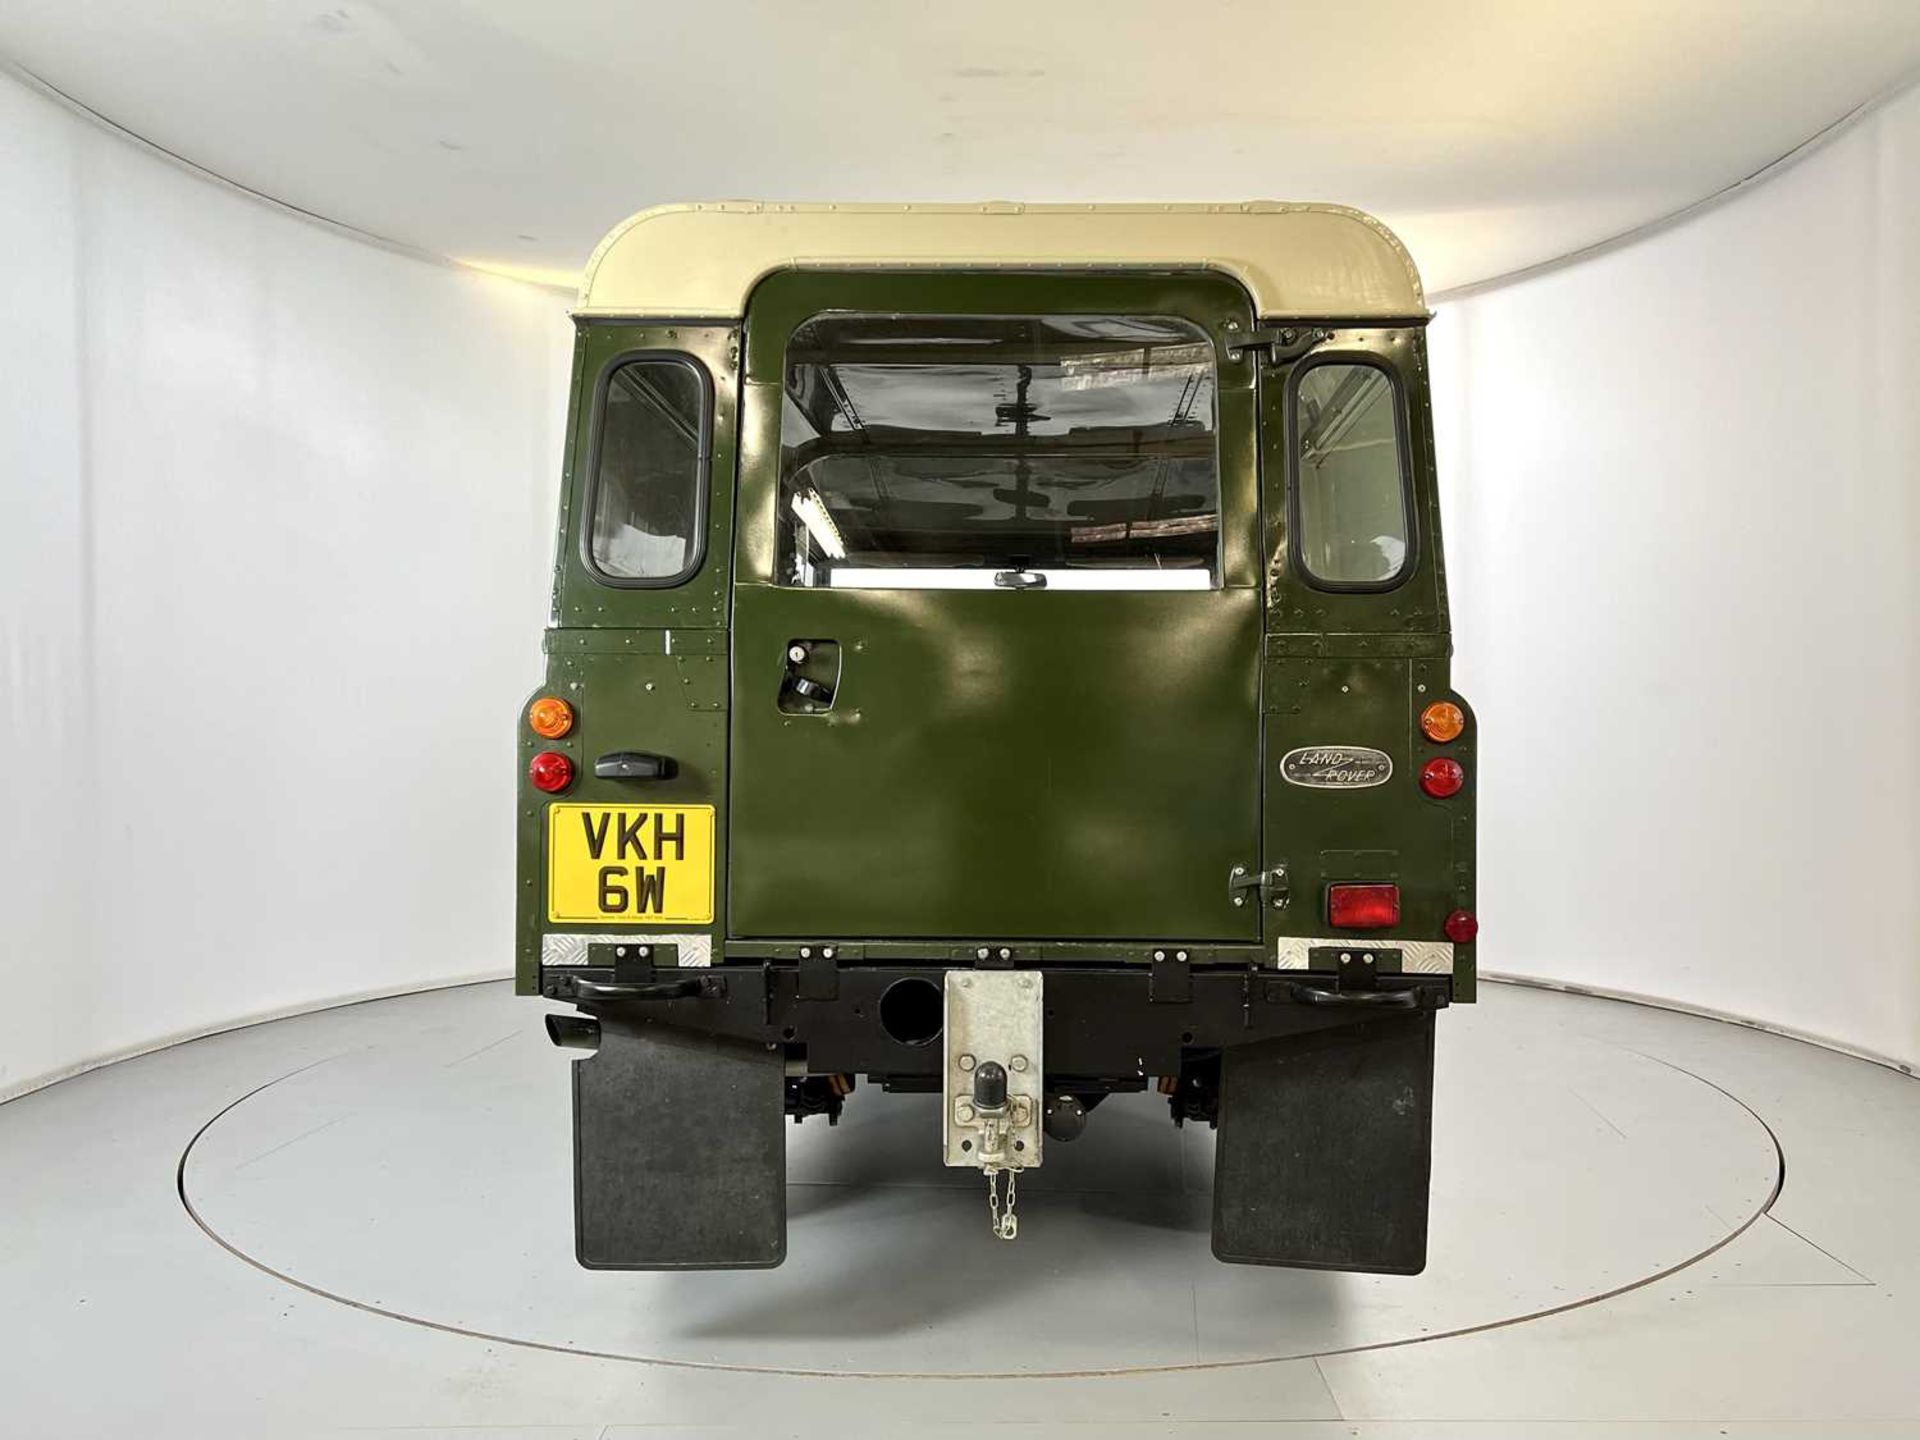 1981 Land Rover Series 3 - 6 Cylinder - Image 8 of 31